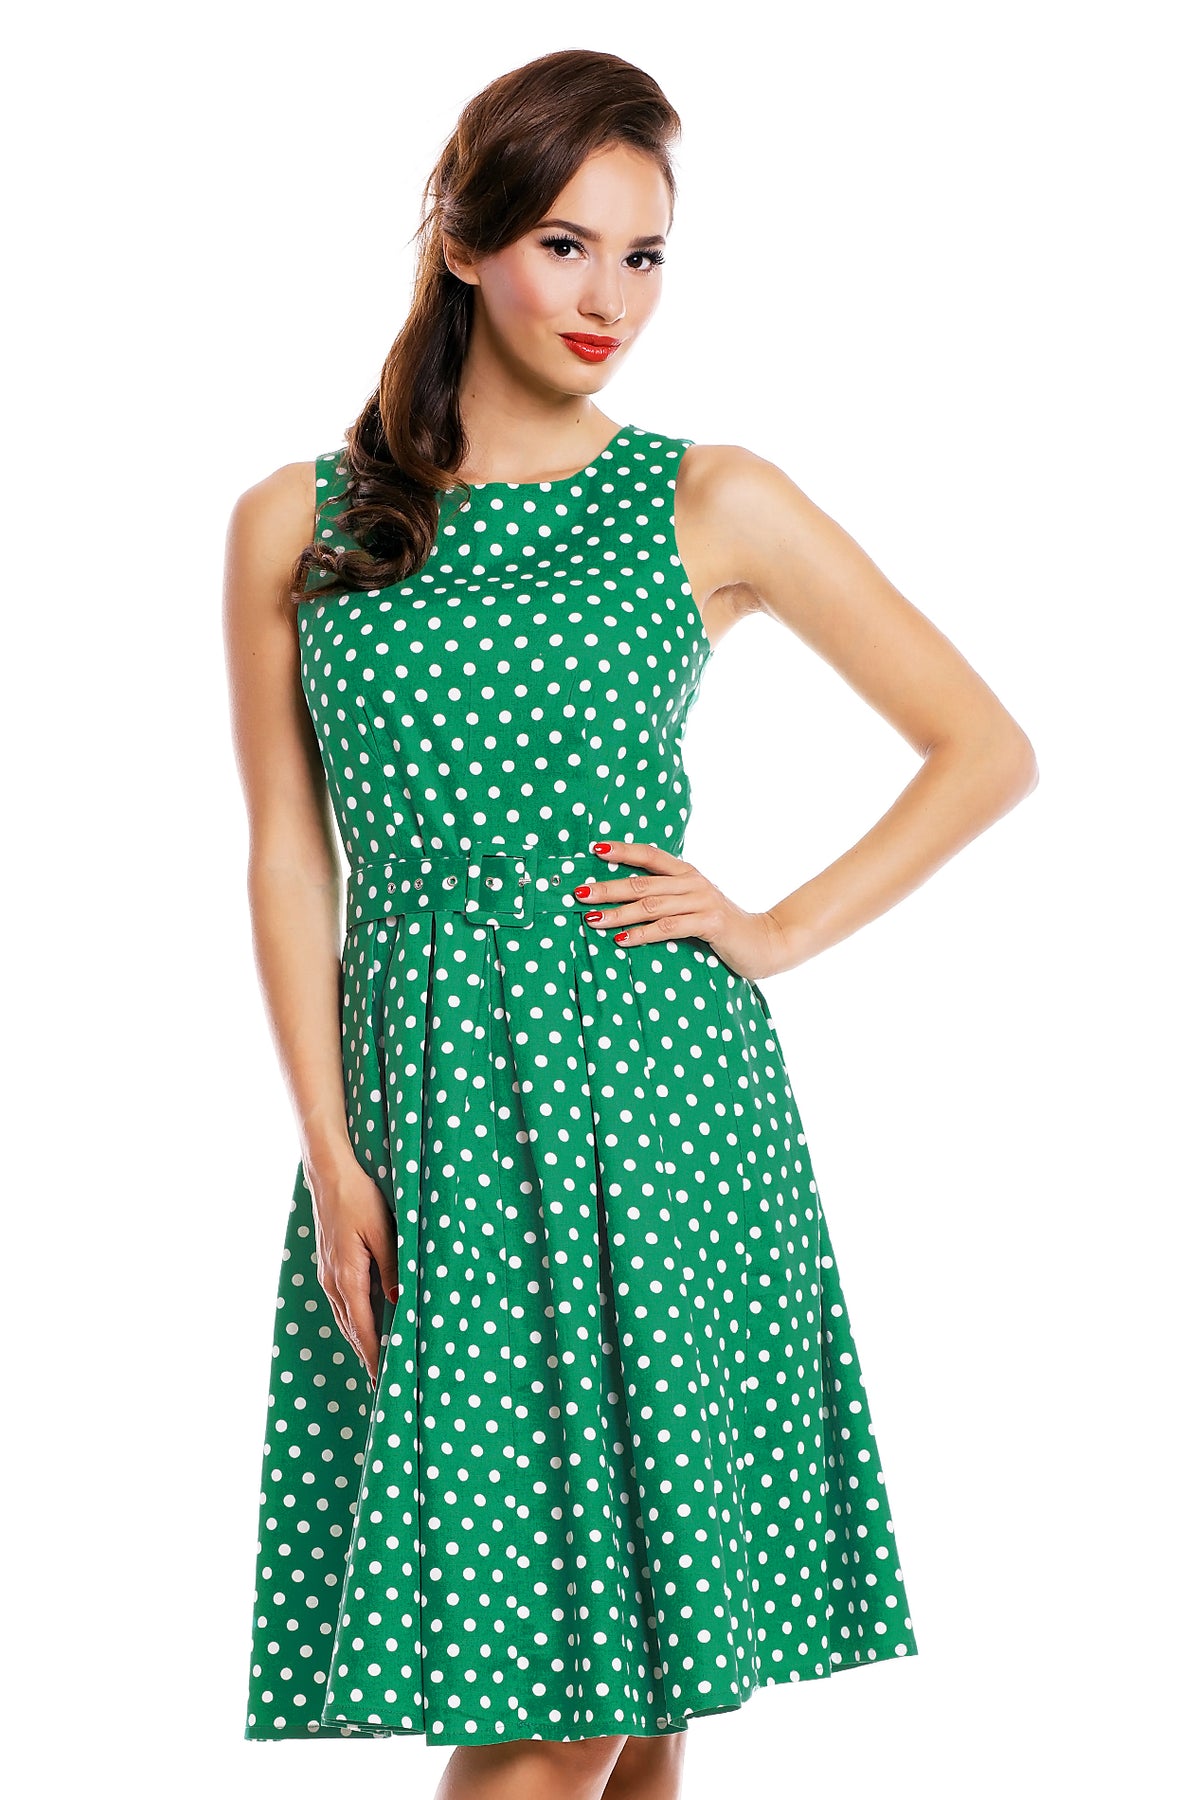 Lola Green Polka Dot Vintage Swing Dress by Dolly and Dotty